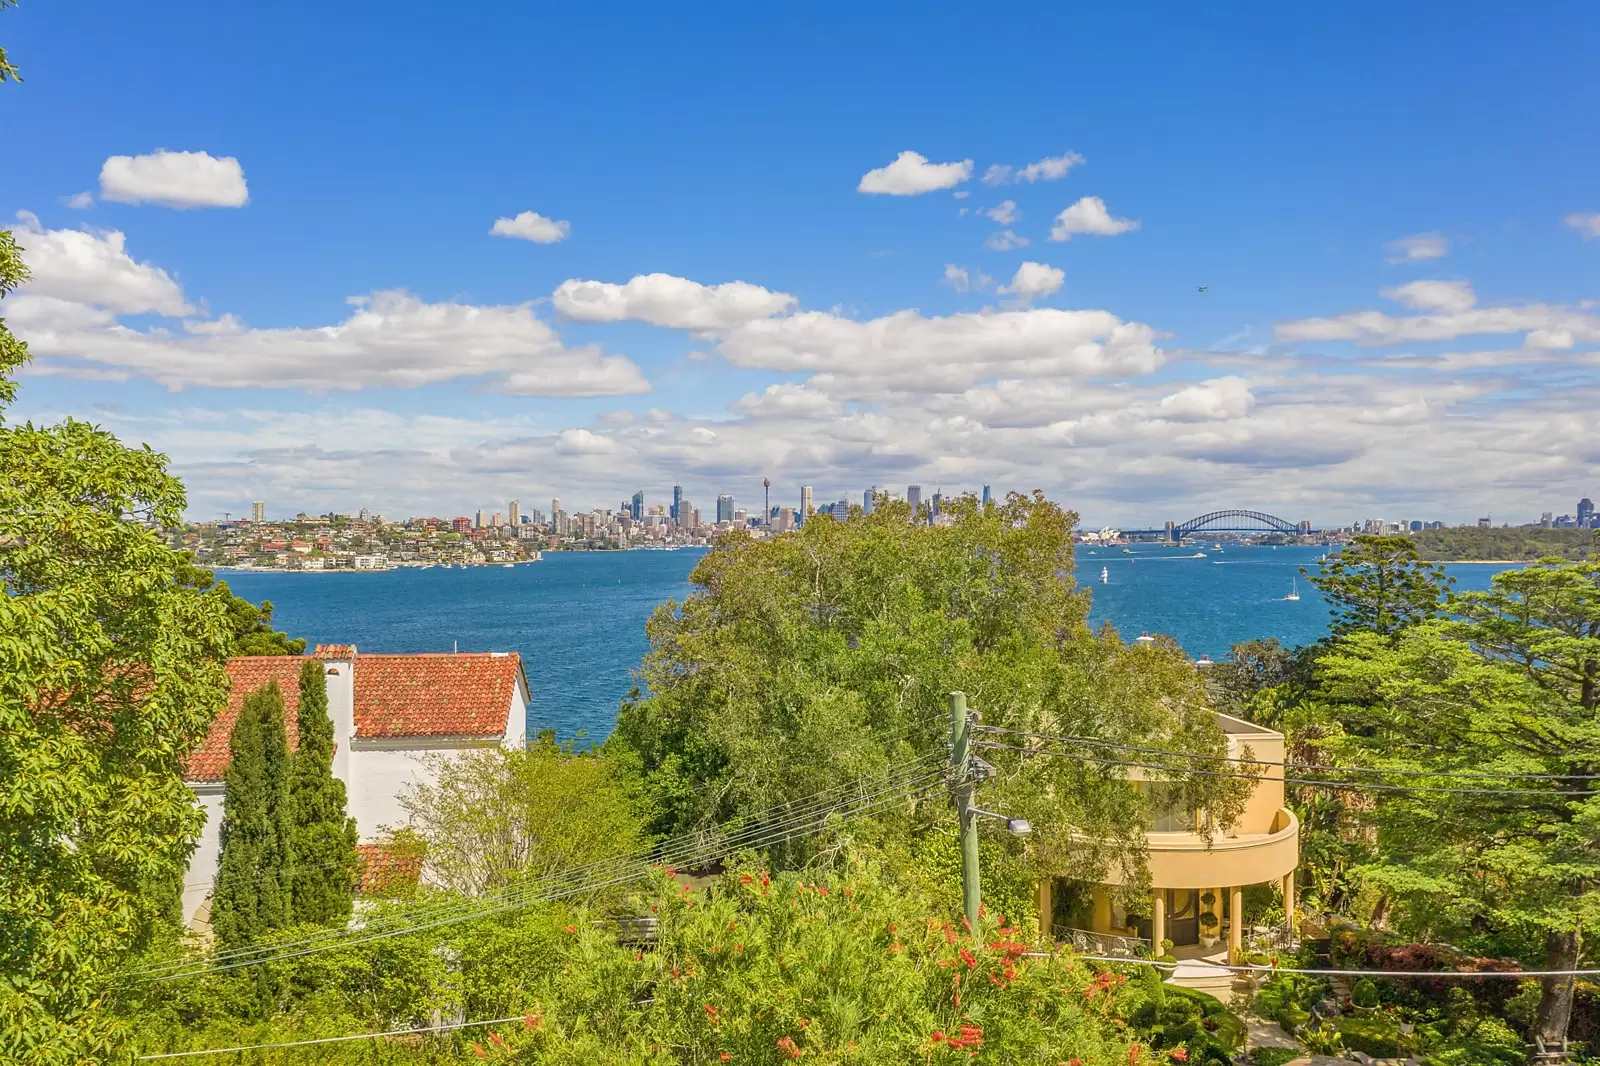 Photo #14: 41 Vaucluse Road, Vaucluse - Sold by Sydney Sotheby's International Realty